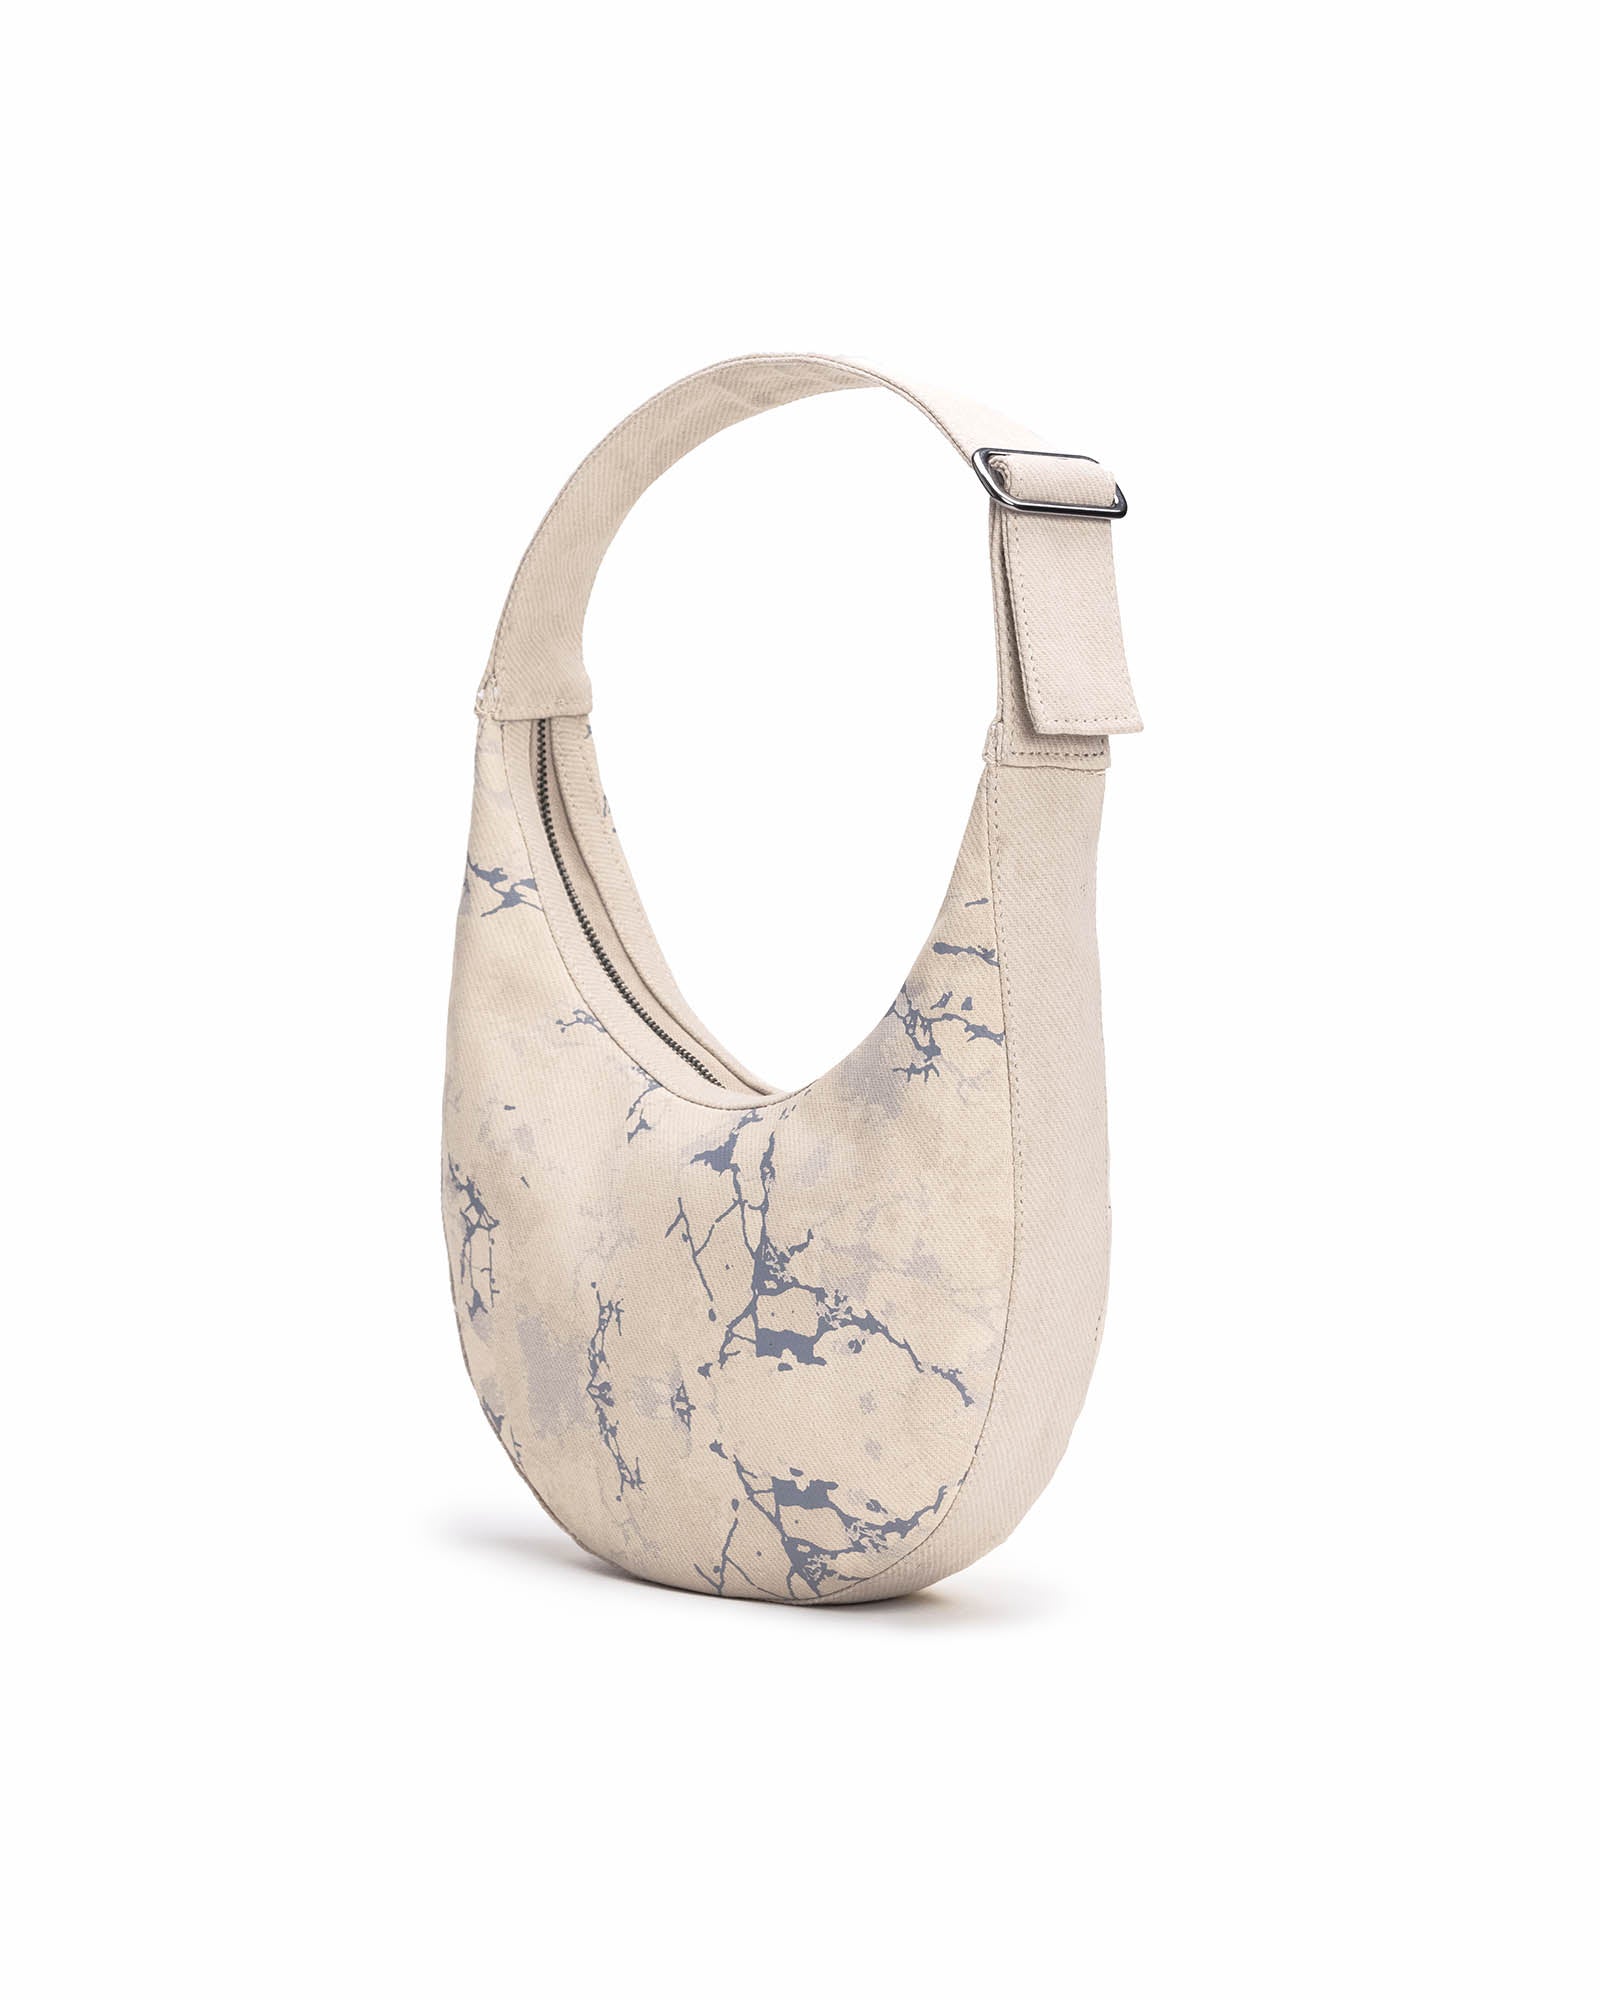 The Moon Bag - Marble Marvel Ecoright